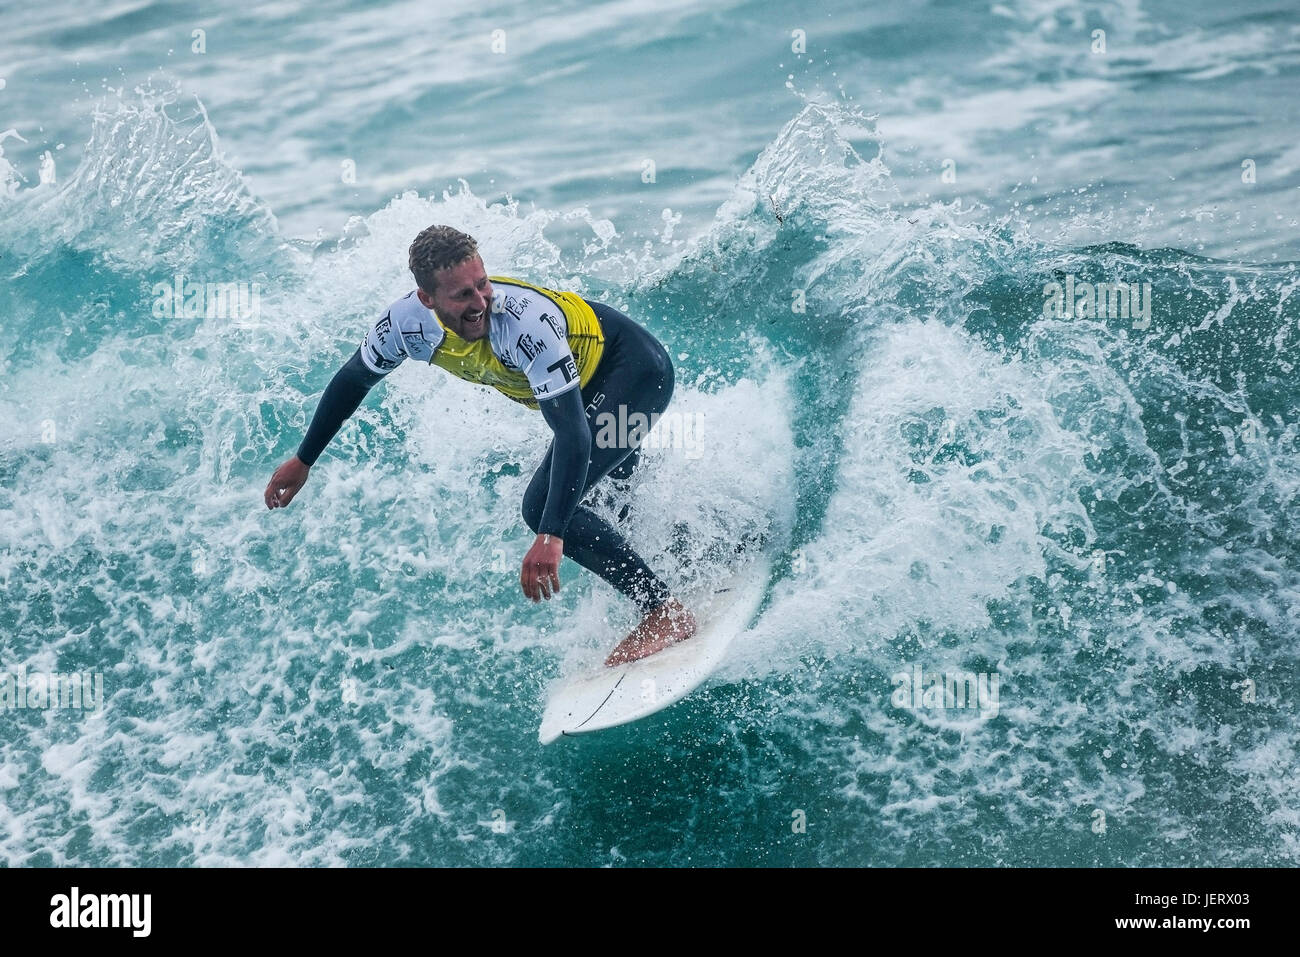 Surfing UK.  Cornwall surfing. A surfer in a competition at Fistral Beach in Newquay. Stock Photo